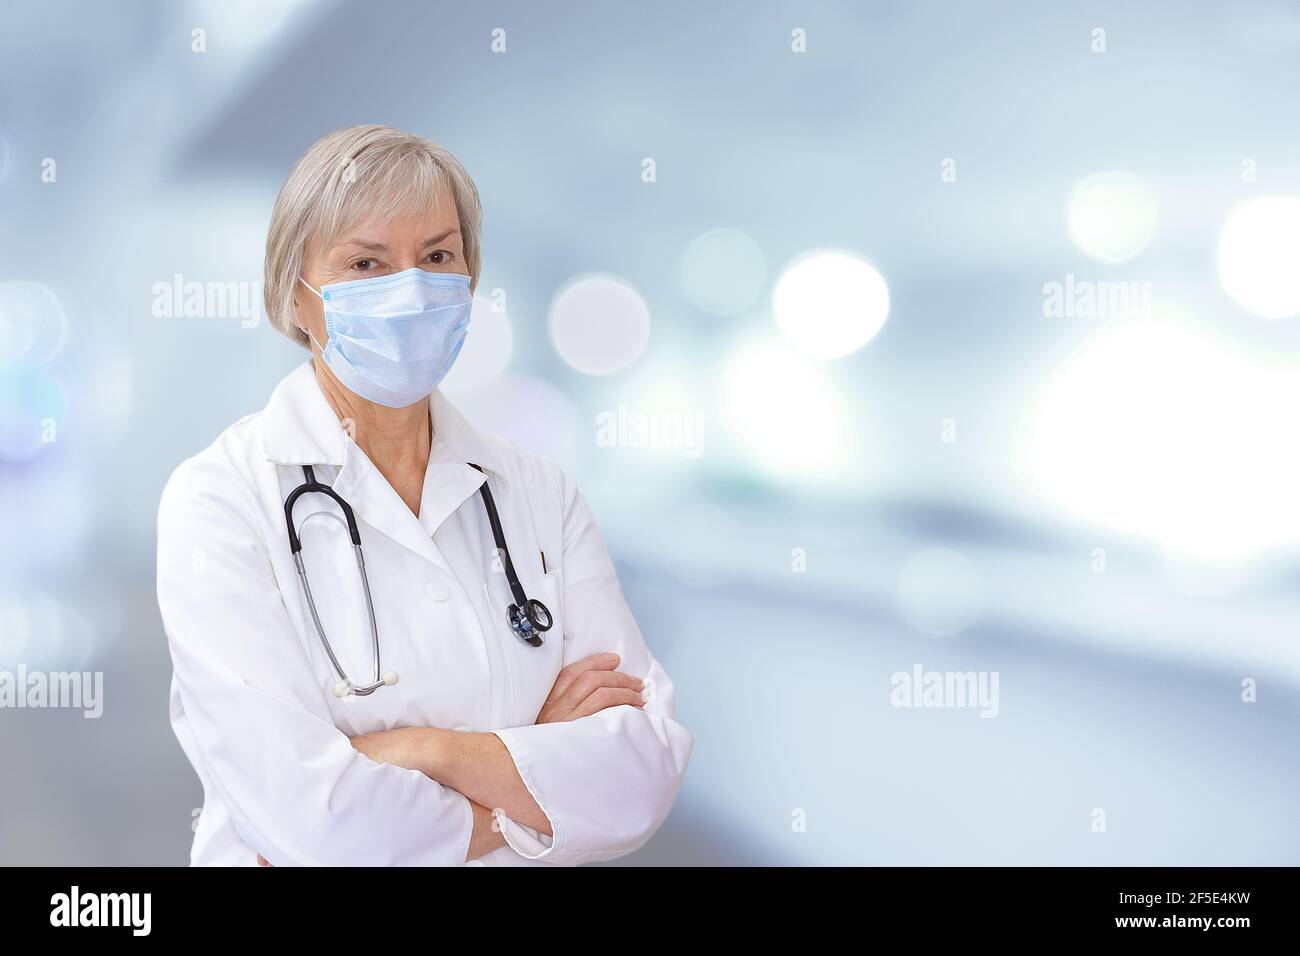 Senior female doctor with protective face mask, blurred background, copy or text space. Stock Photo